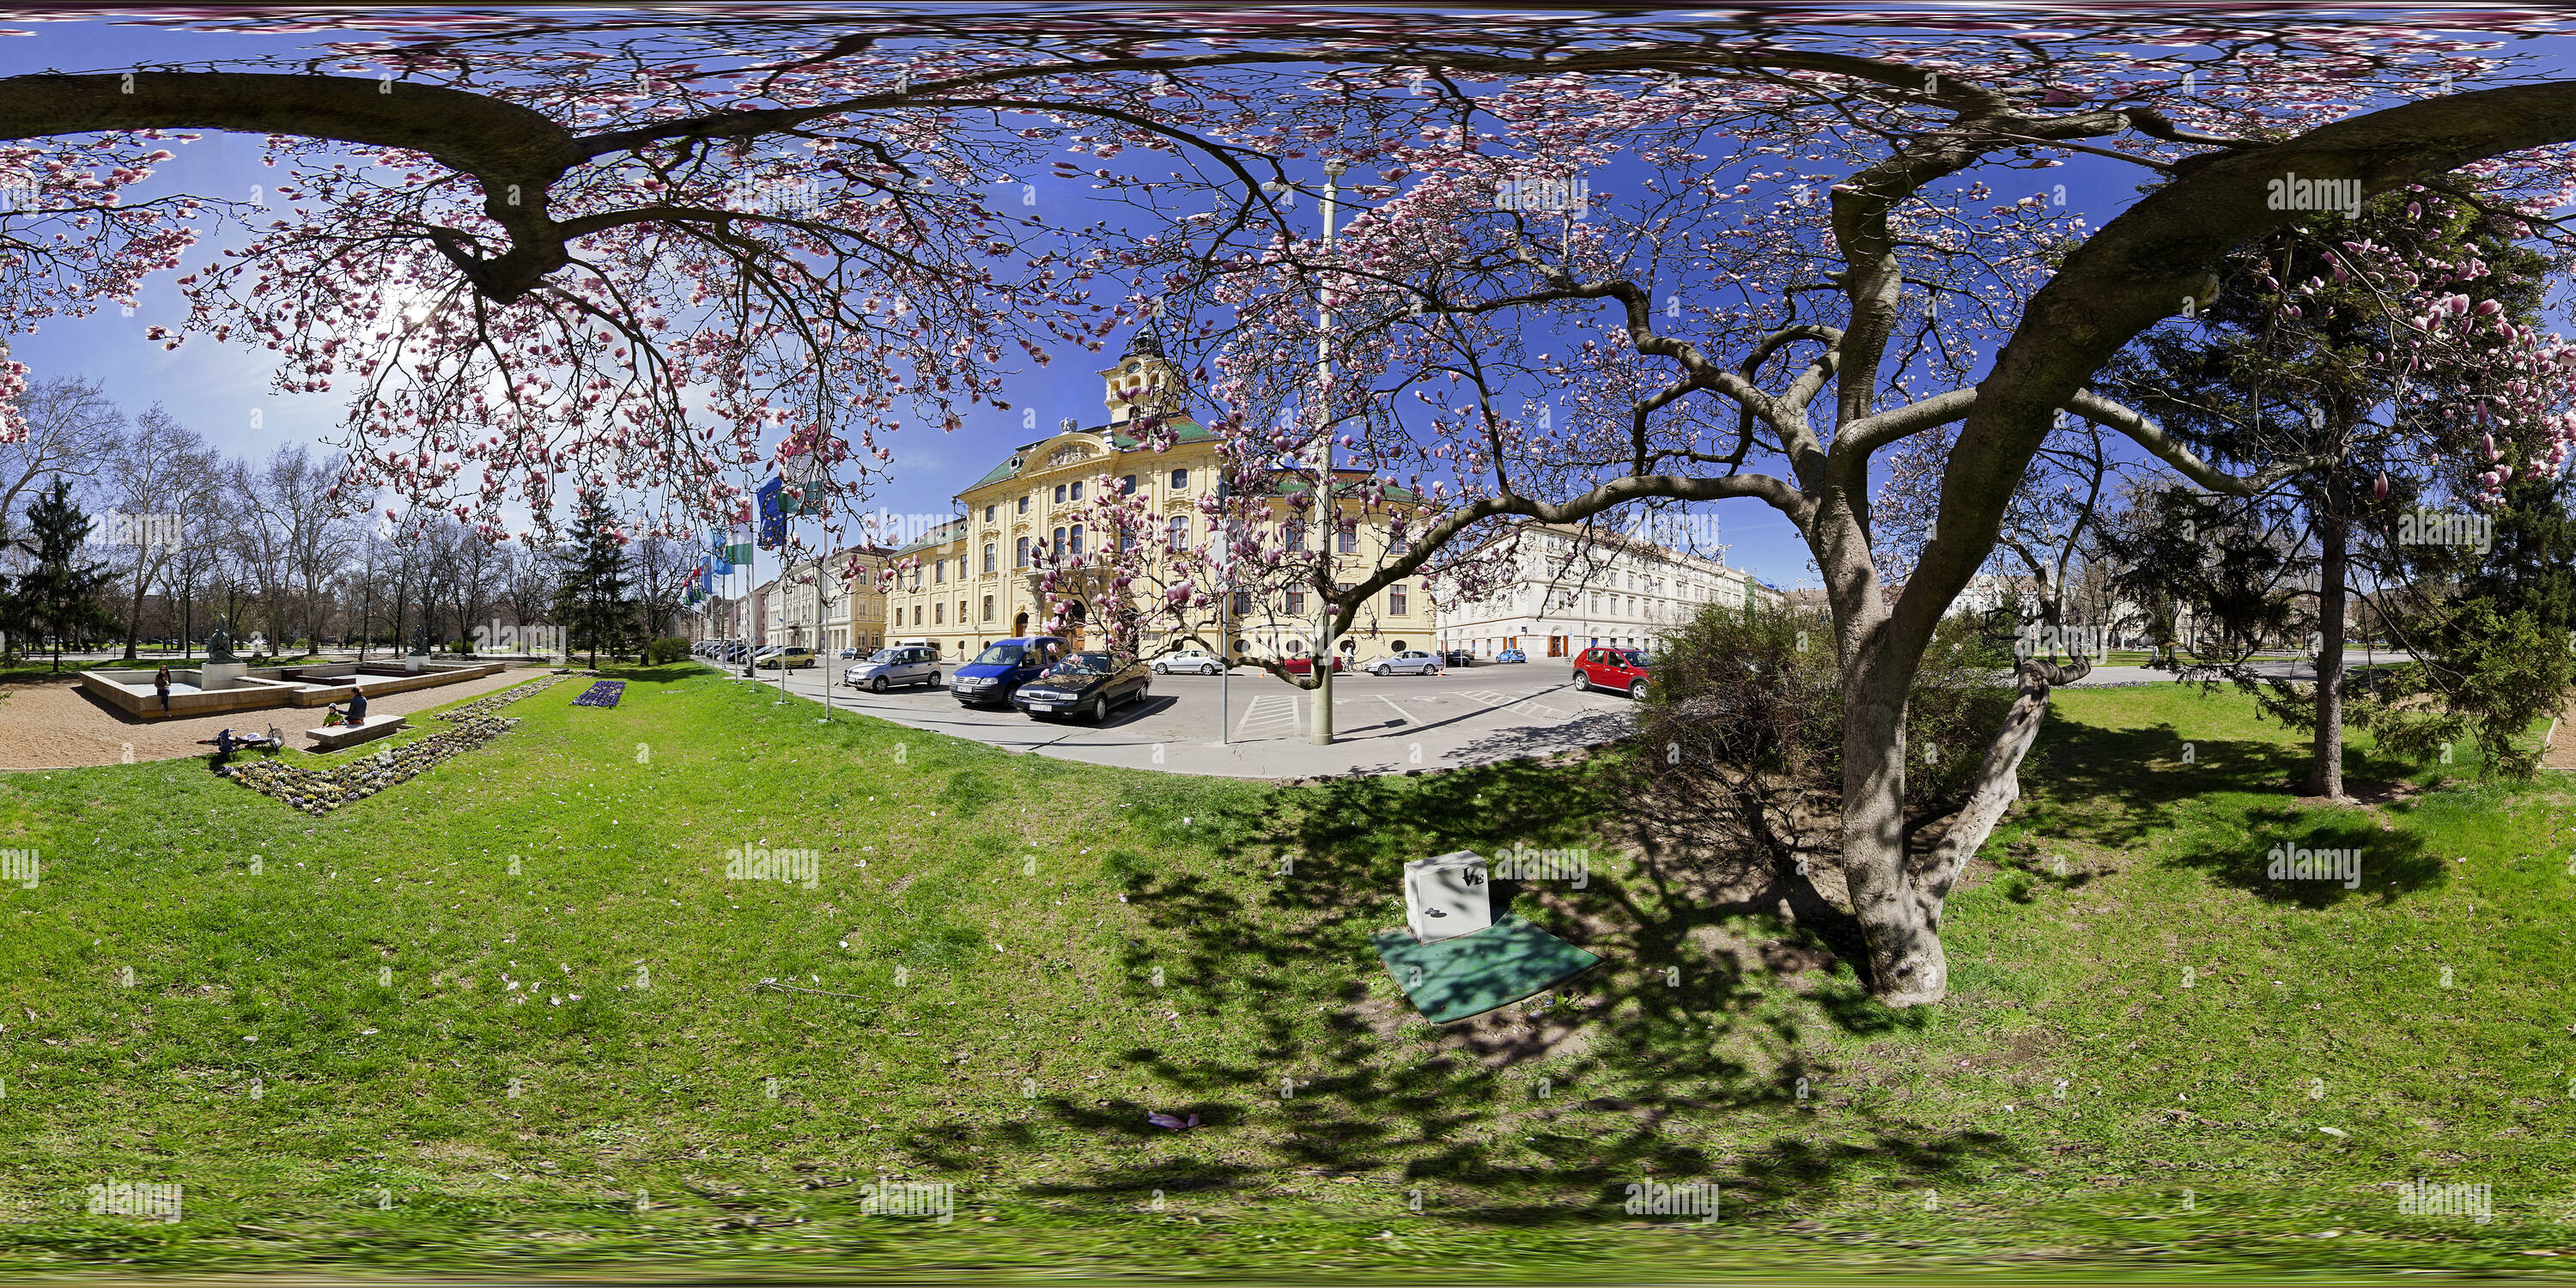 360 degree panoramic view of Magnolia in Szeged